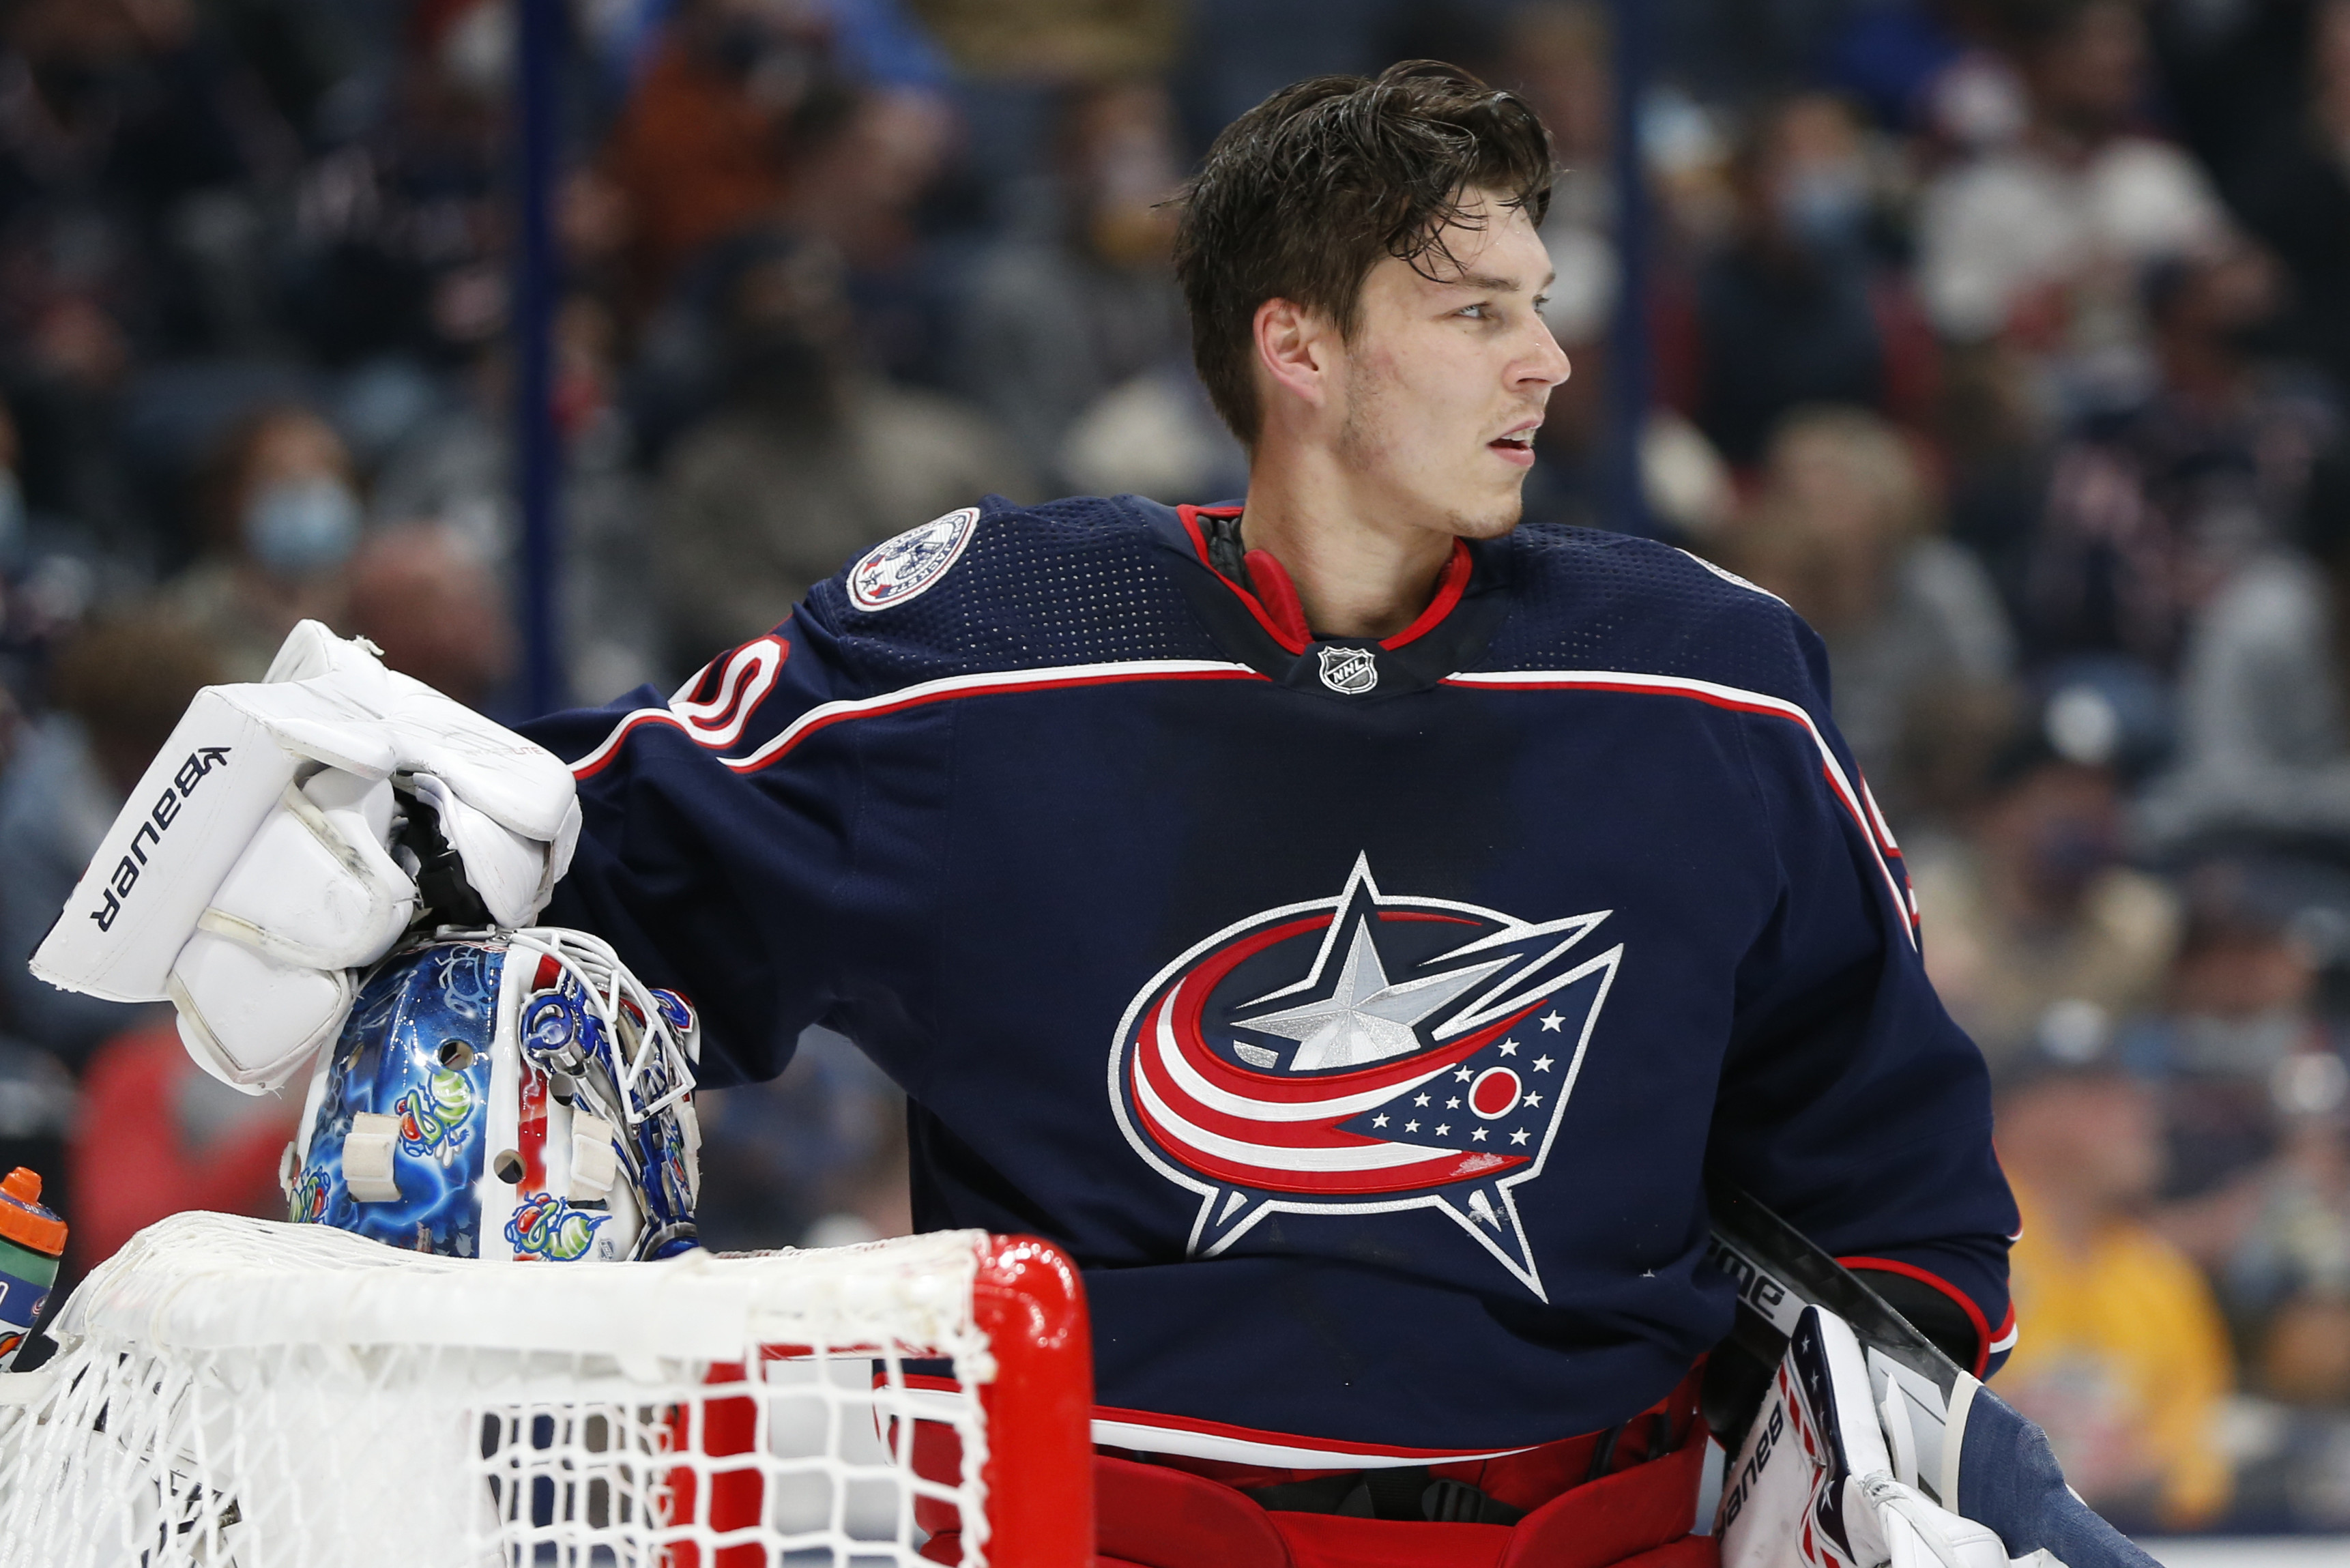 Columbus Blue Jackets' Elvis Merzlikins asks reporters to temporarily  'leave me alone